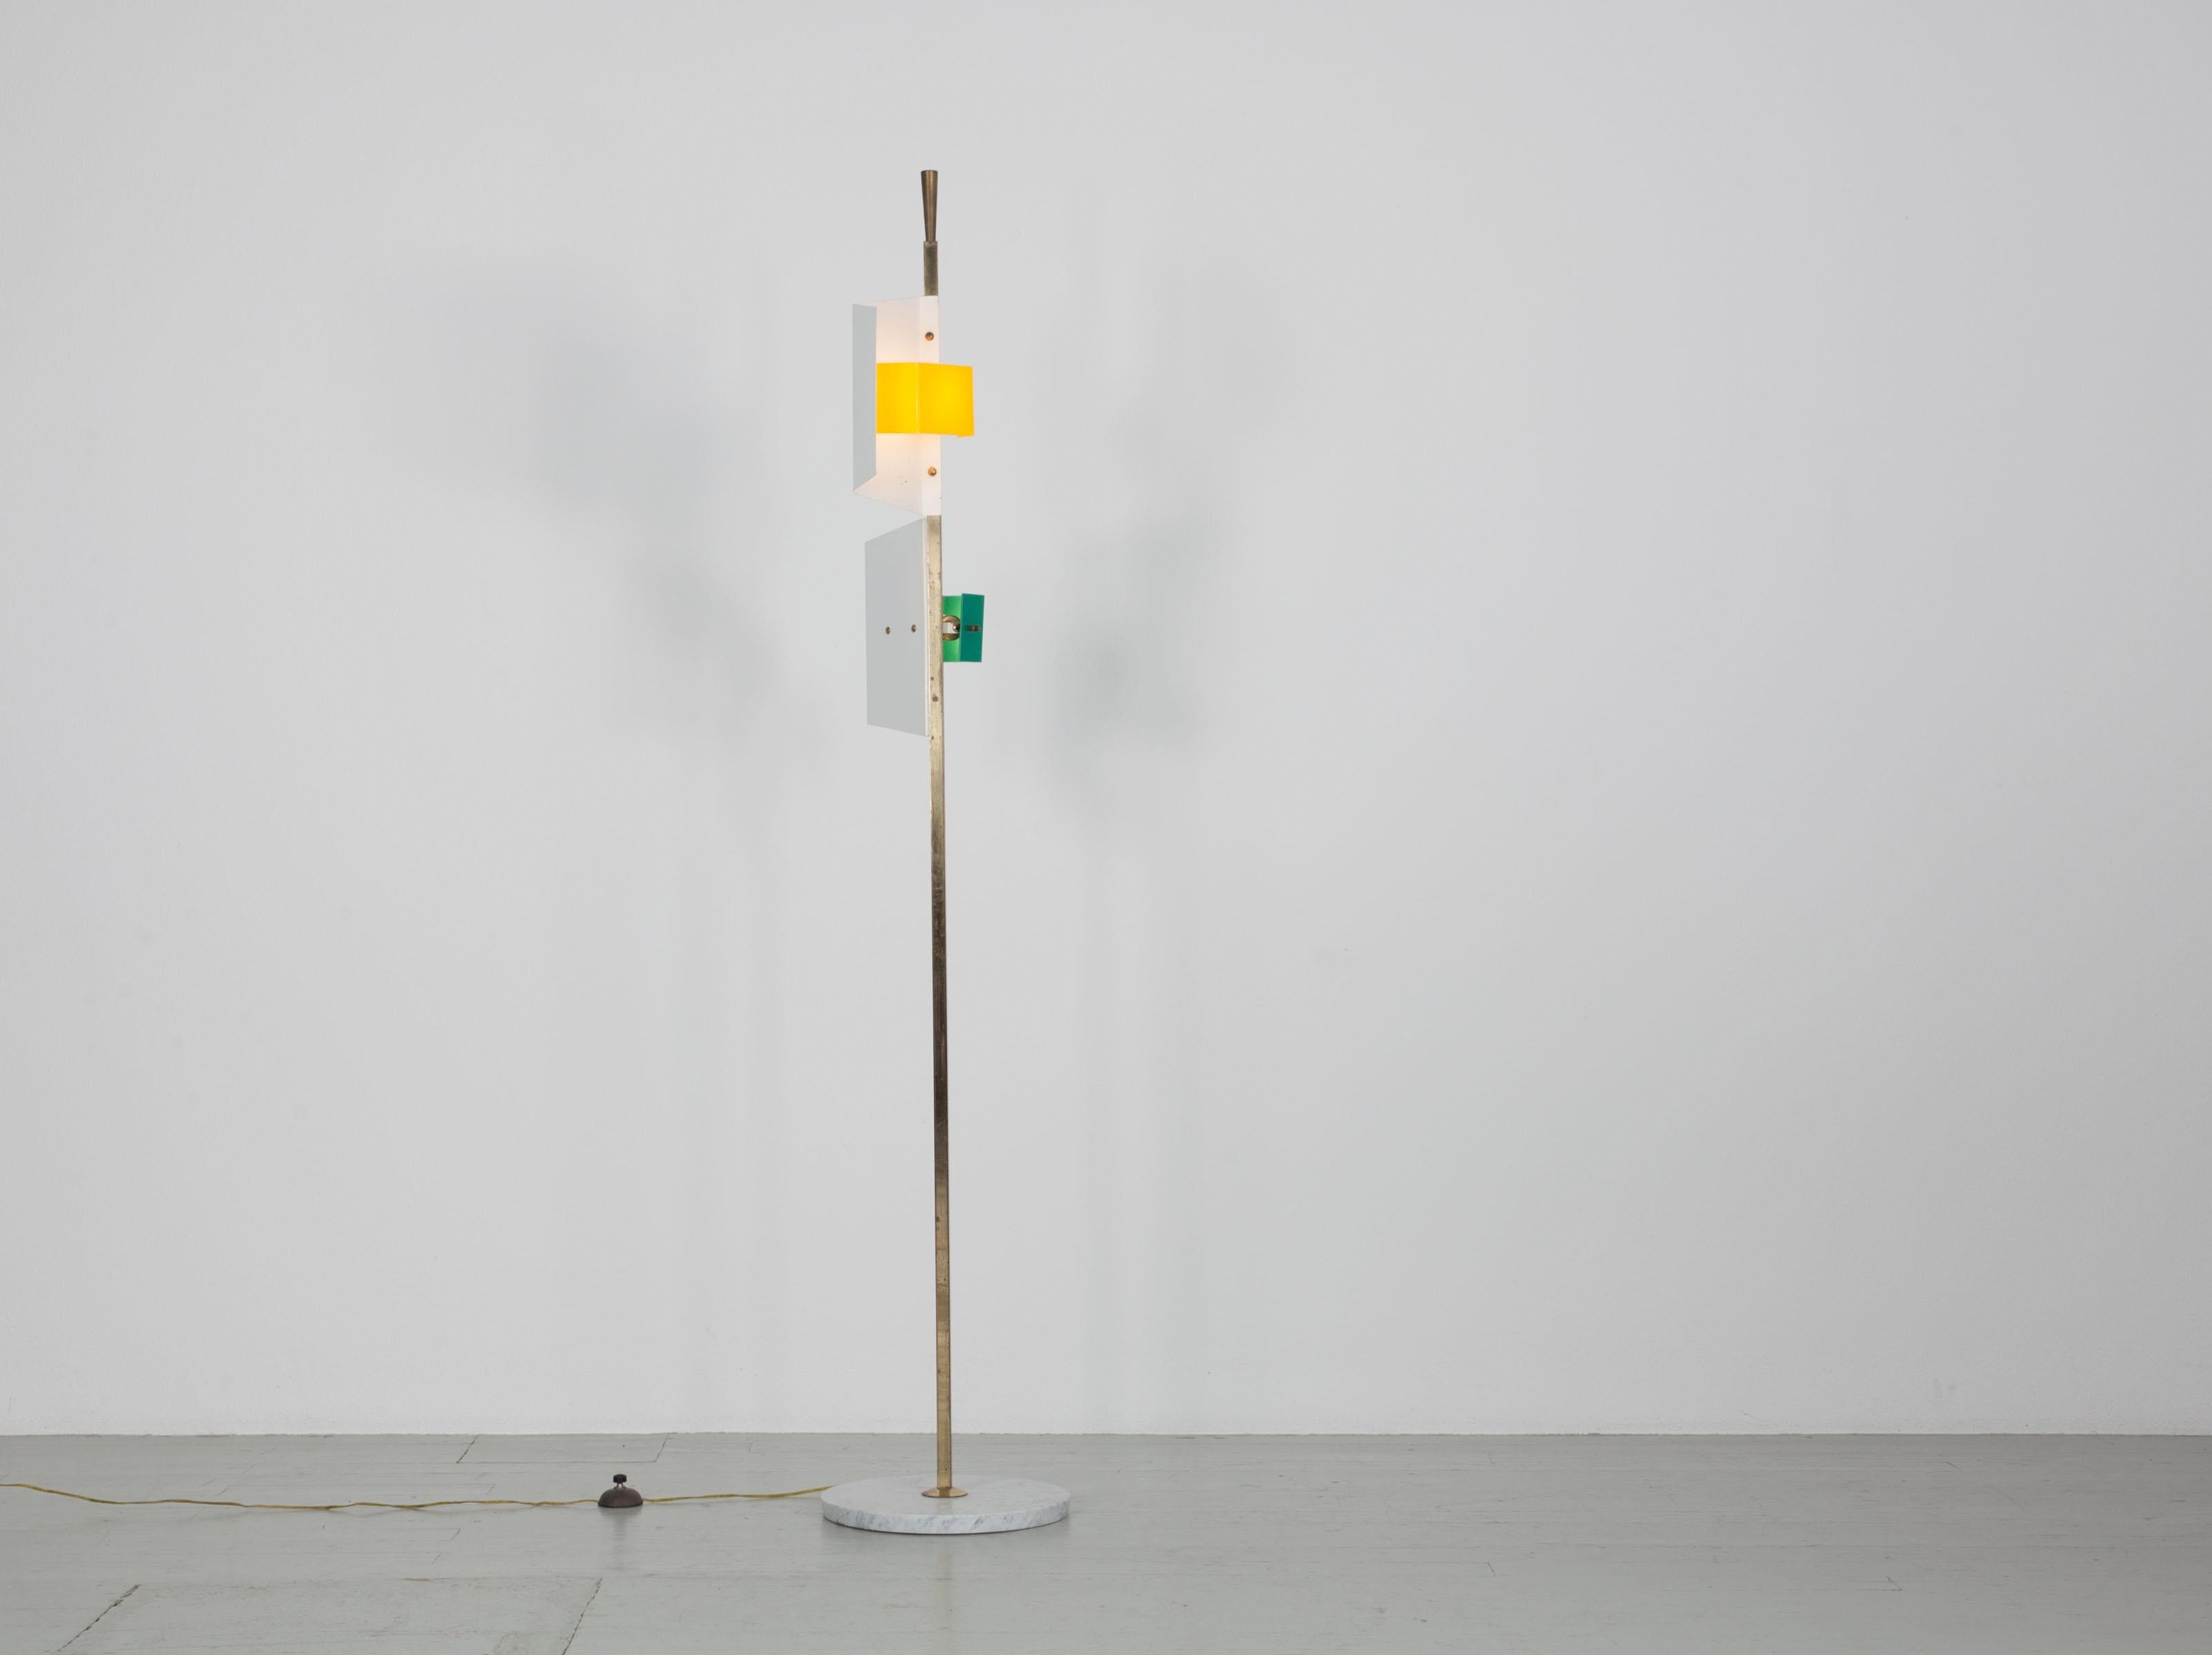 Mid-Century Modern  Italian Stilnovo floor lamp with yellow and green Perspex shade from the 50s. For Sale